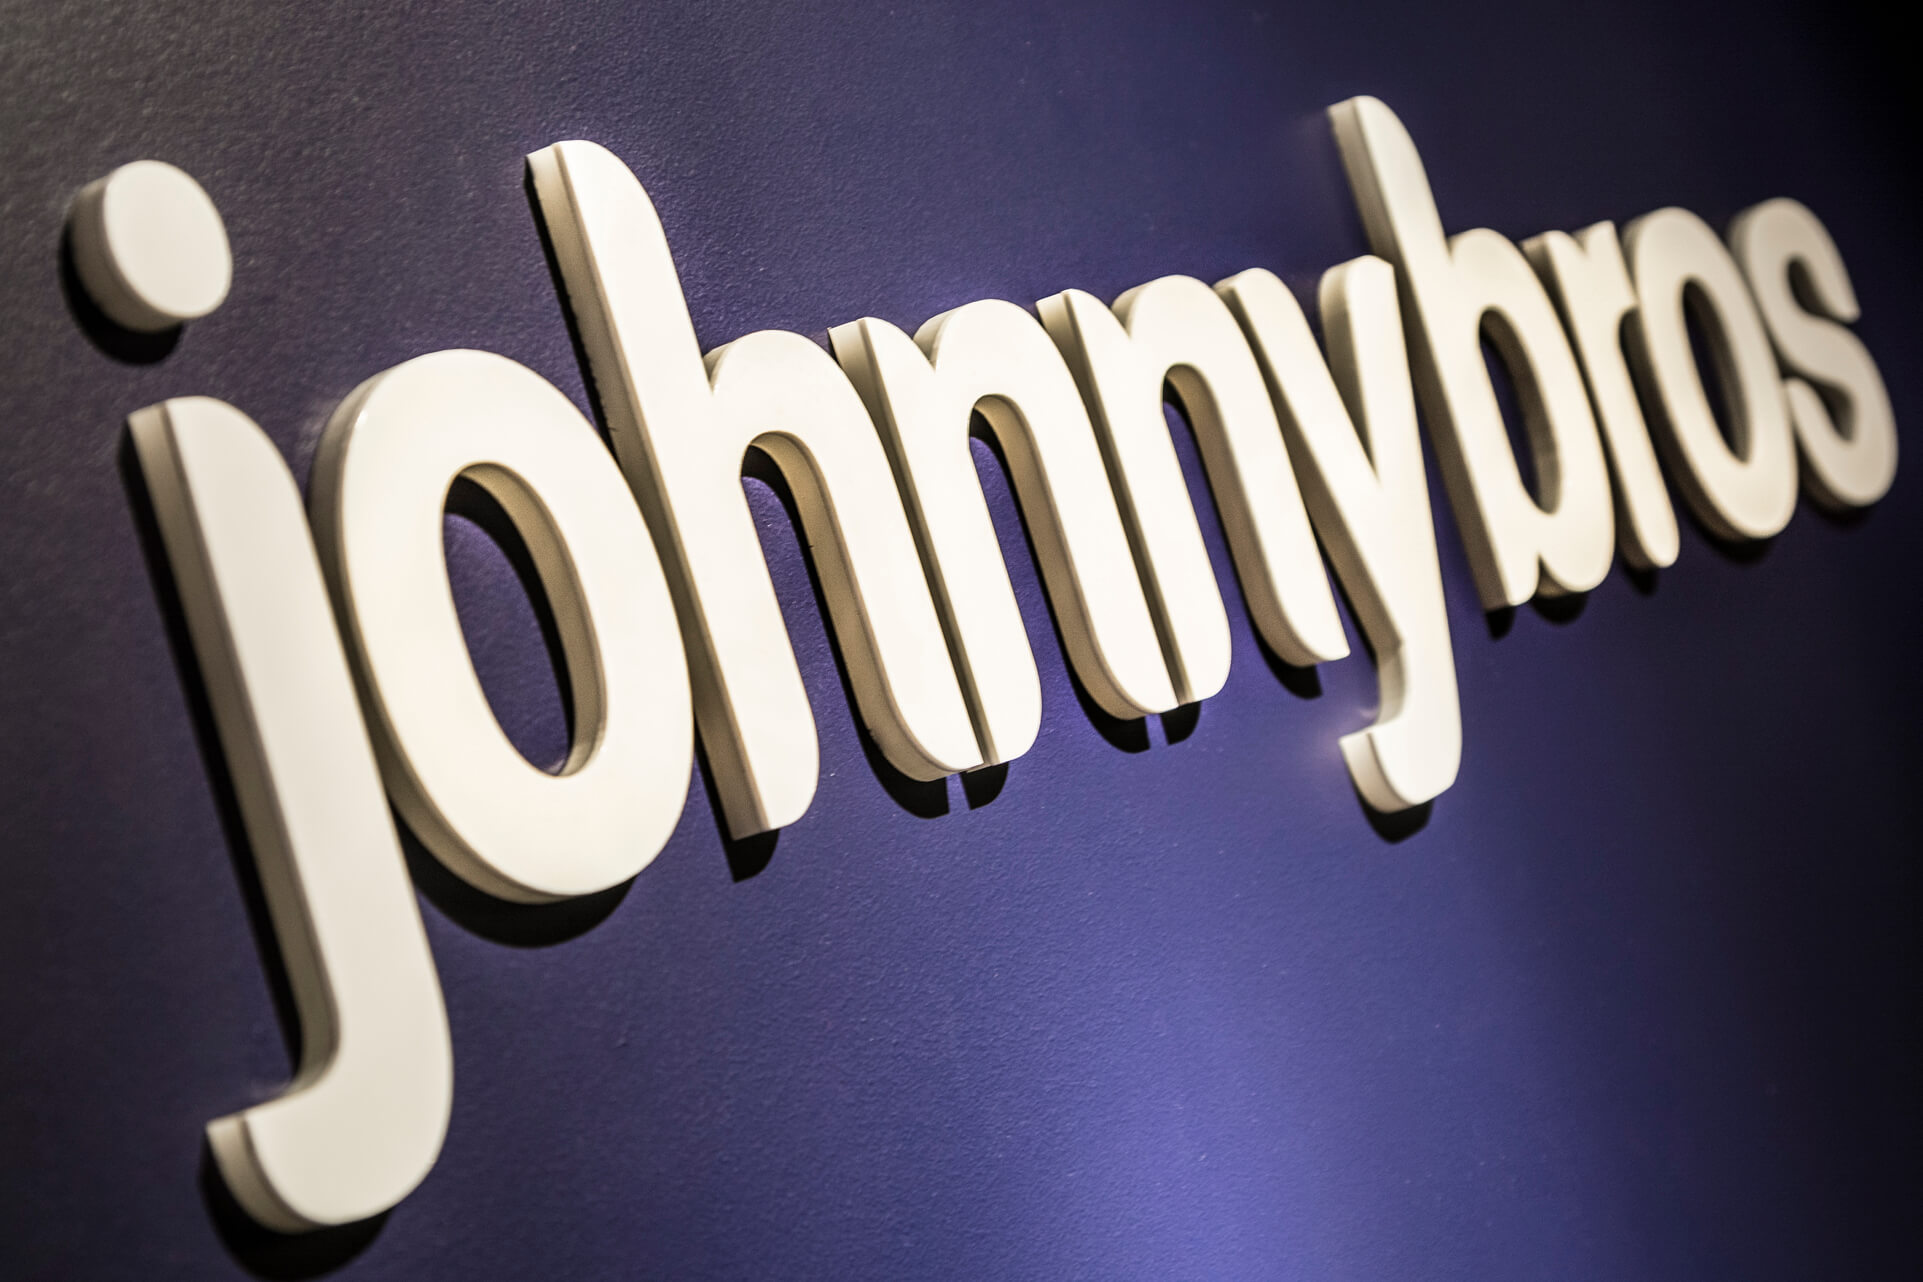 Johnnybros - Johnybros - 3D letters made of acrylic cut out by laser